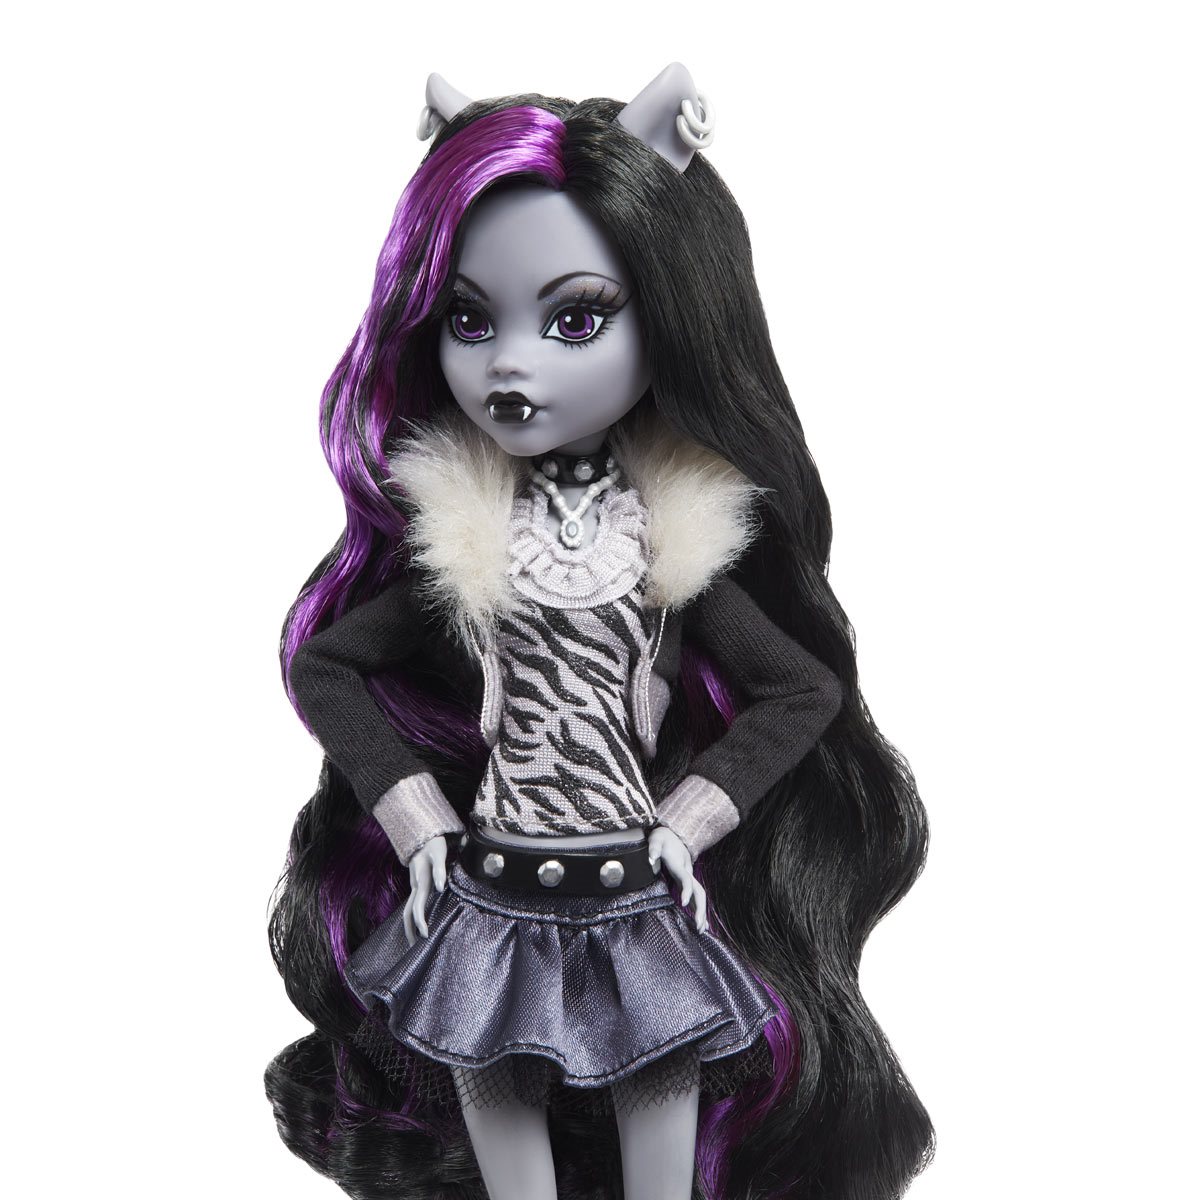 ** IN HAND** Monster High Reel Drama Clawdeen Wolf Doll BRAND NEW SHIPS ASAP